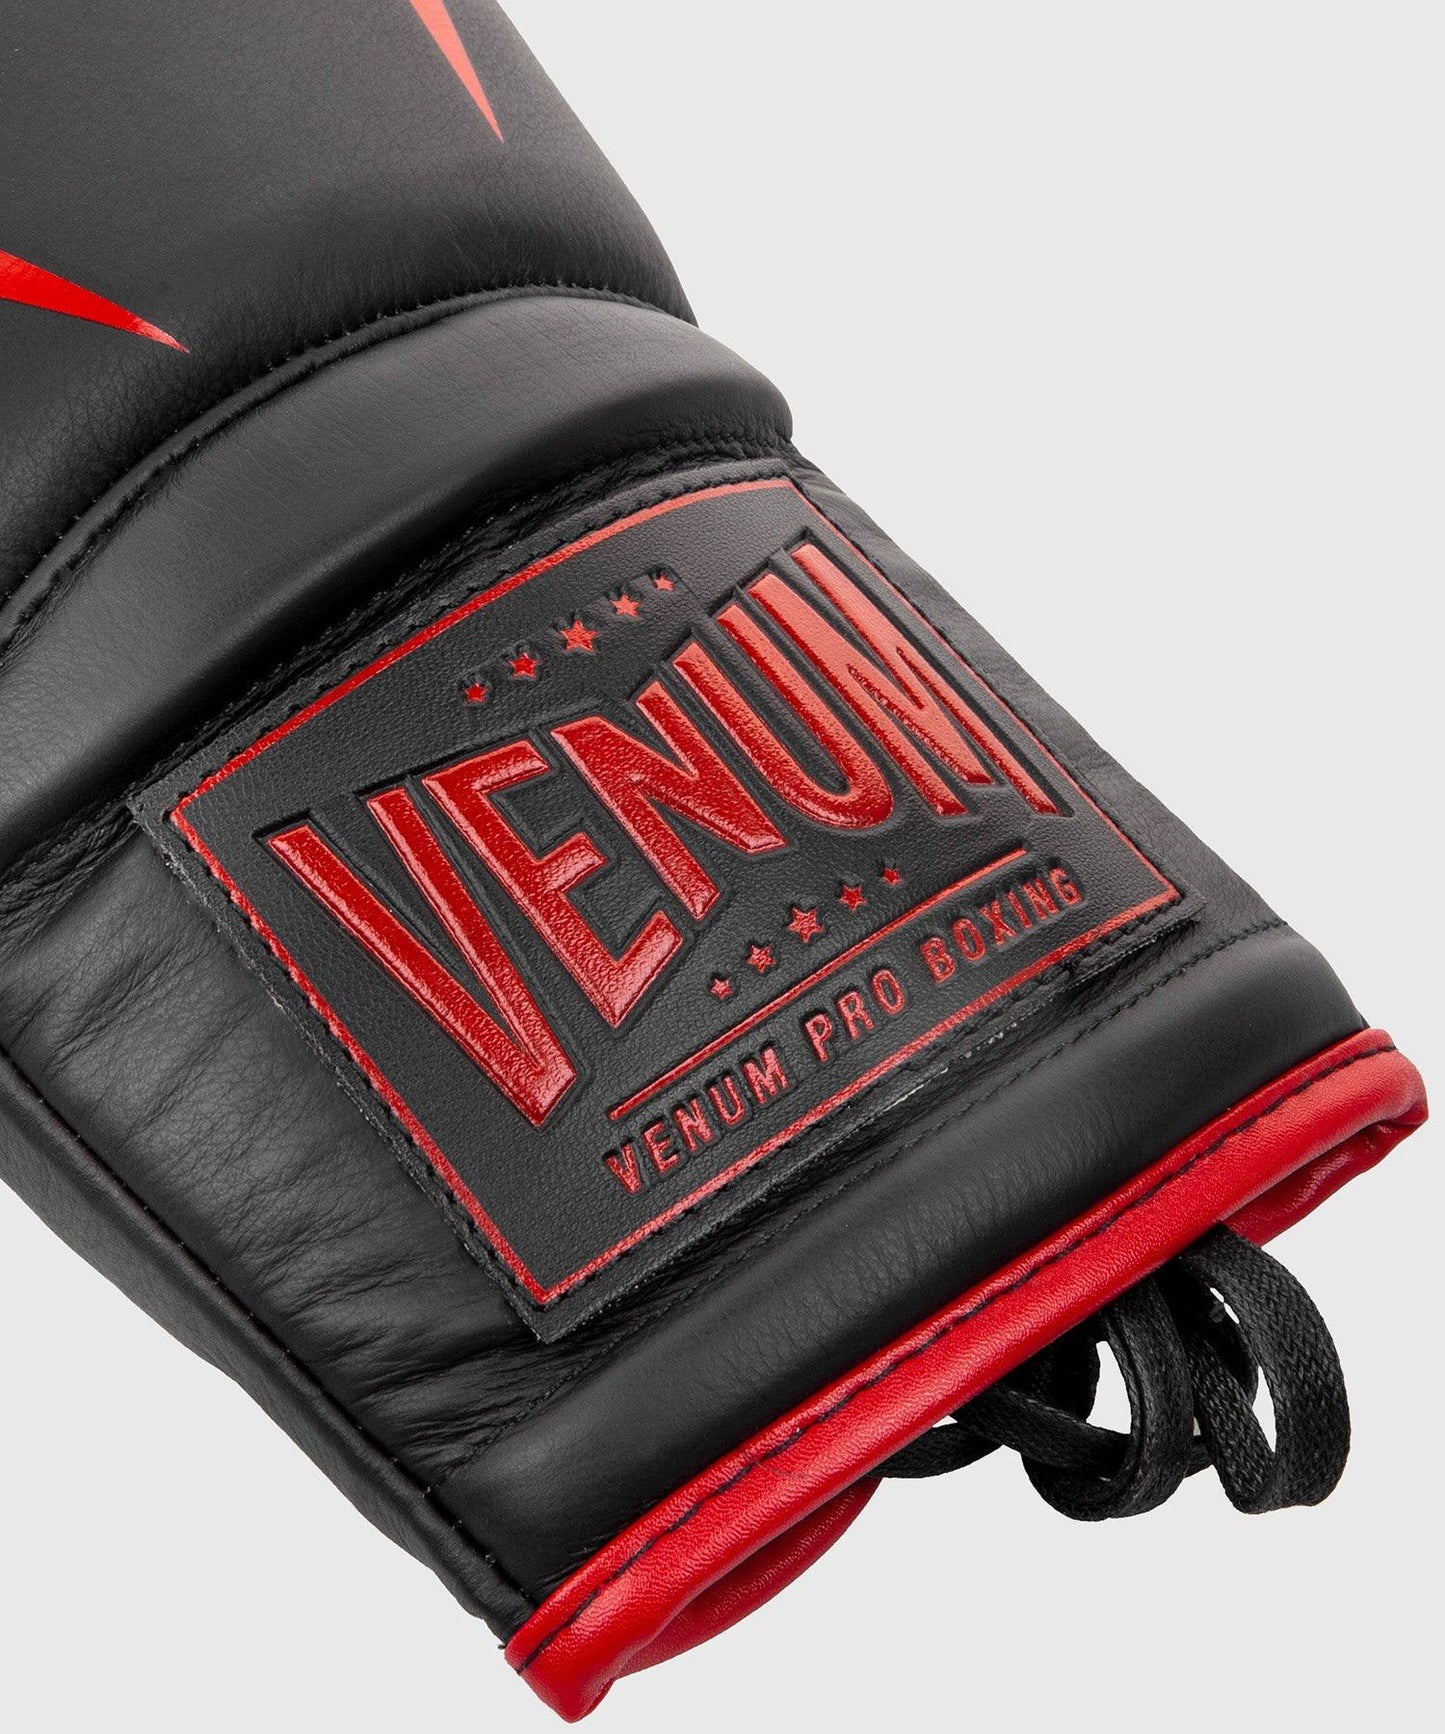 Venum Giant 2.0 Pro Boxing Gloves - With Laces - Black/Red Picture 7